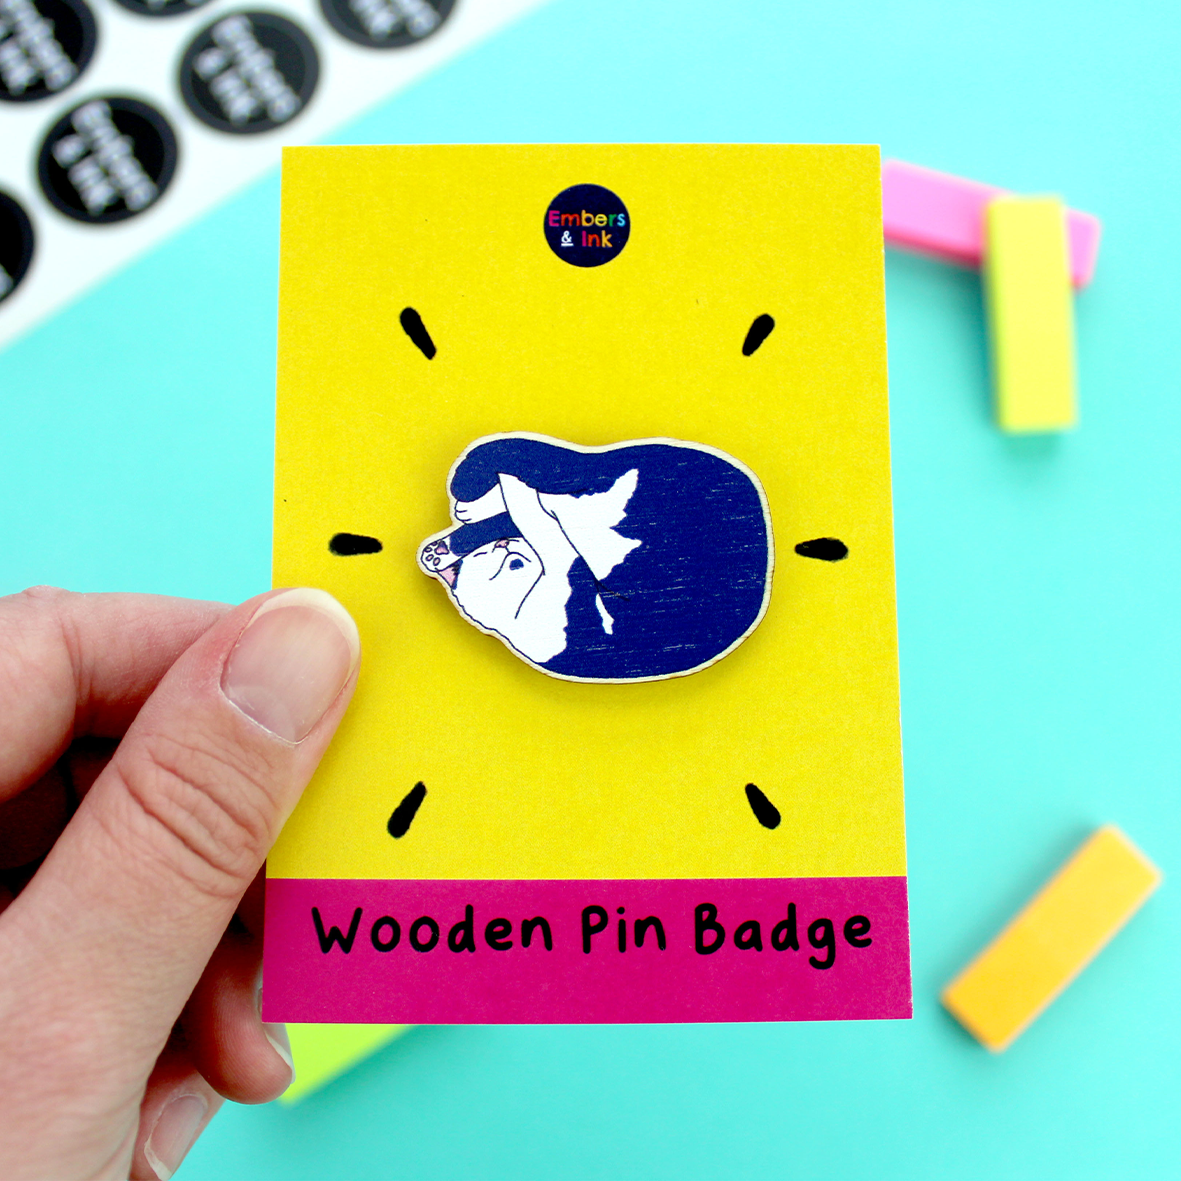 a hand holds a yellow and pink backing board that holds a wooden pin badge of a cat illustration. The cat is blue and white and laying in a cute way